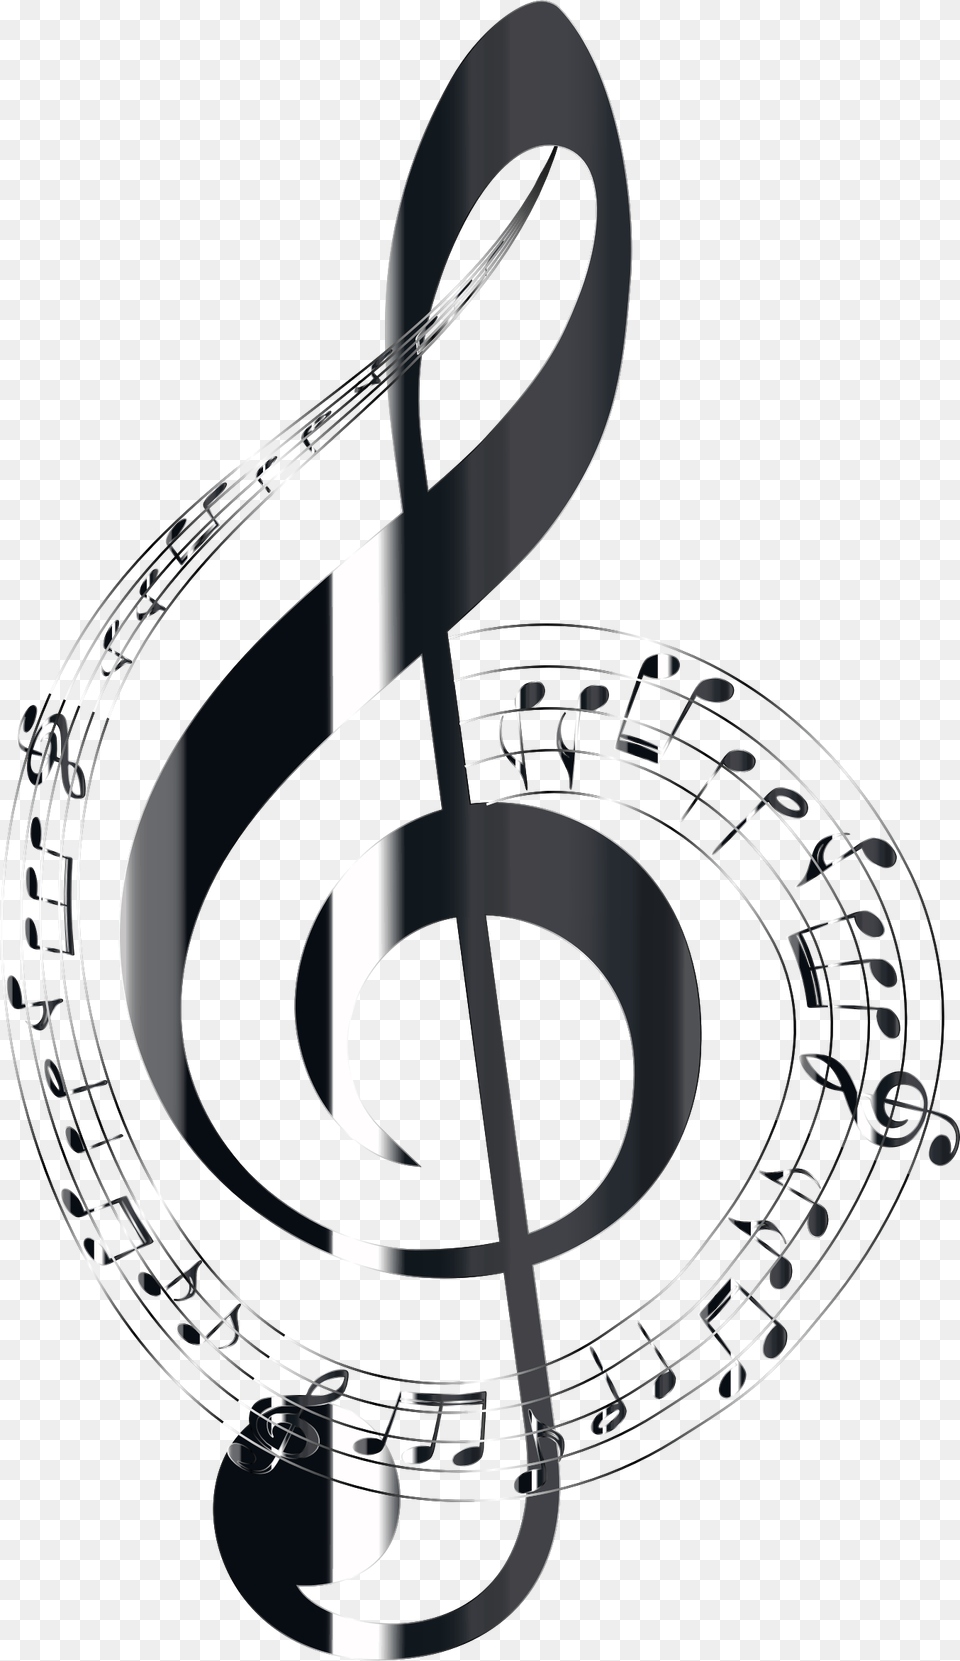 Musical Notes With No Background, Sundial, Festival, Hanukkah Menorah Free Transparent Png